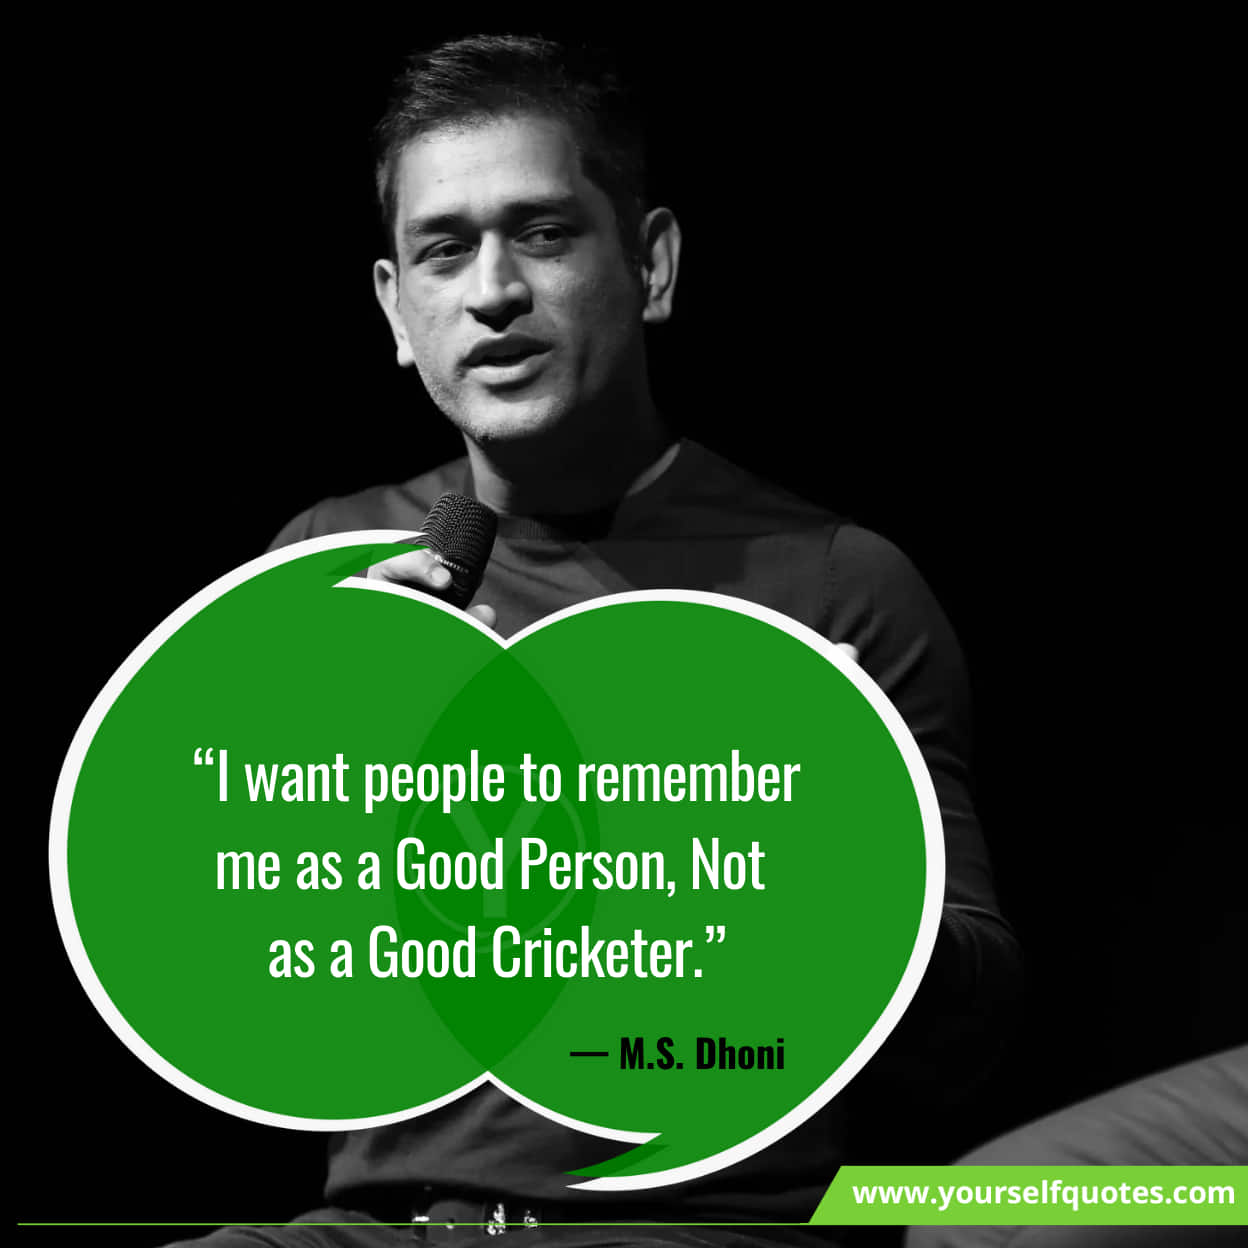 MS Dhoni Quotes On Cricket